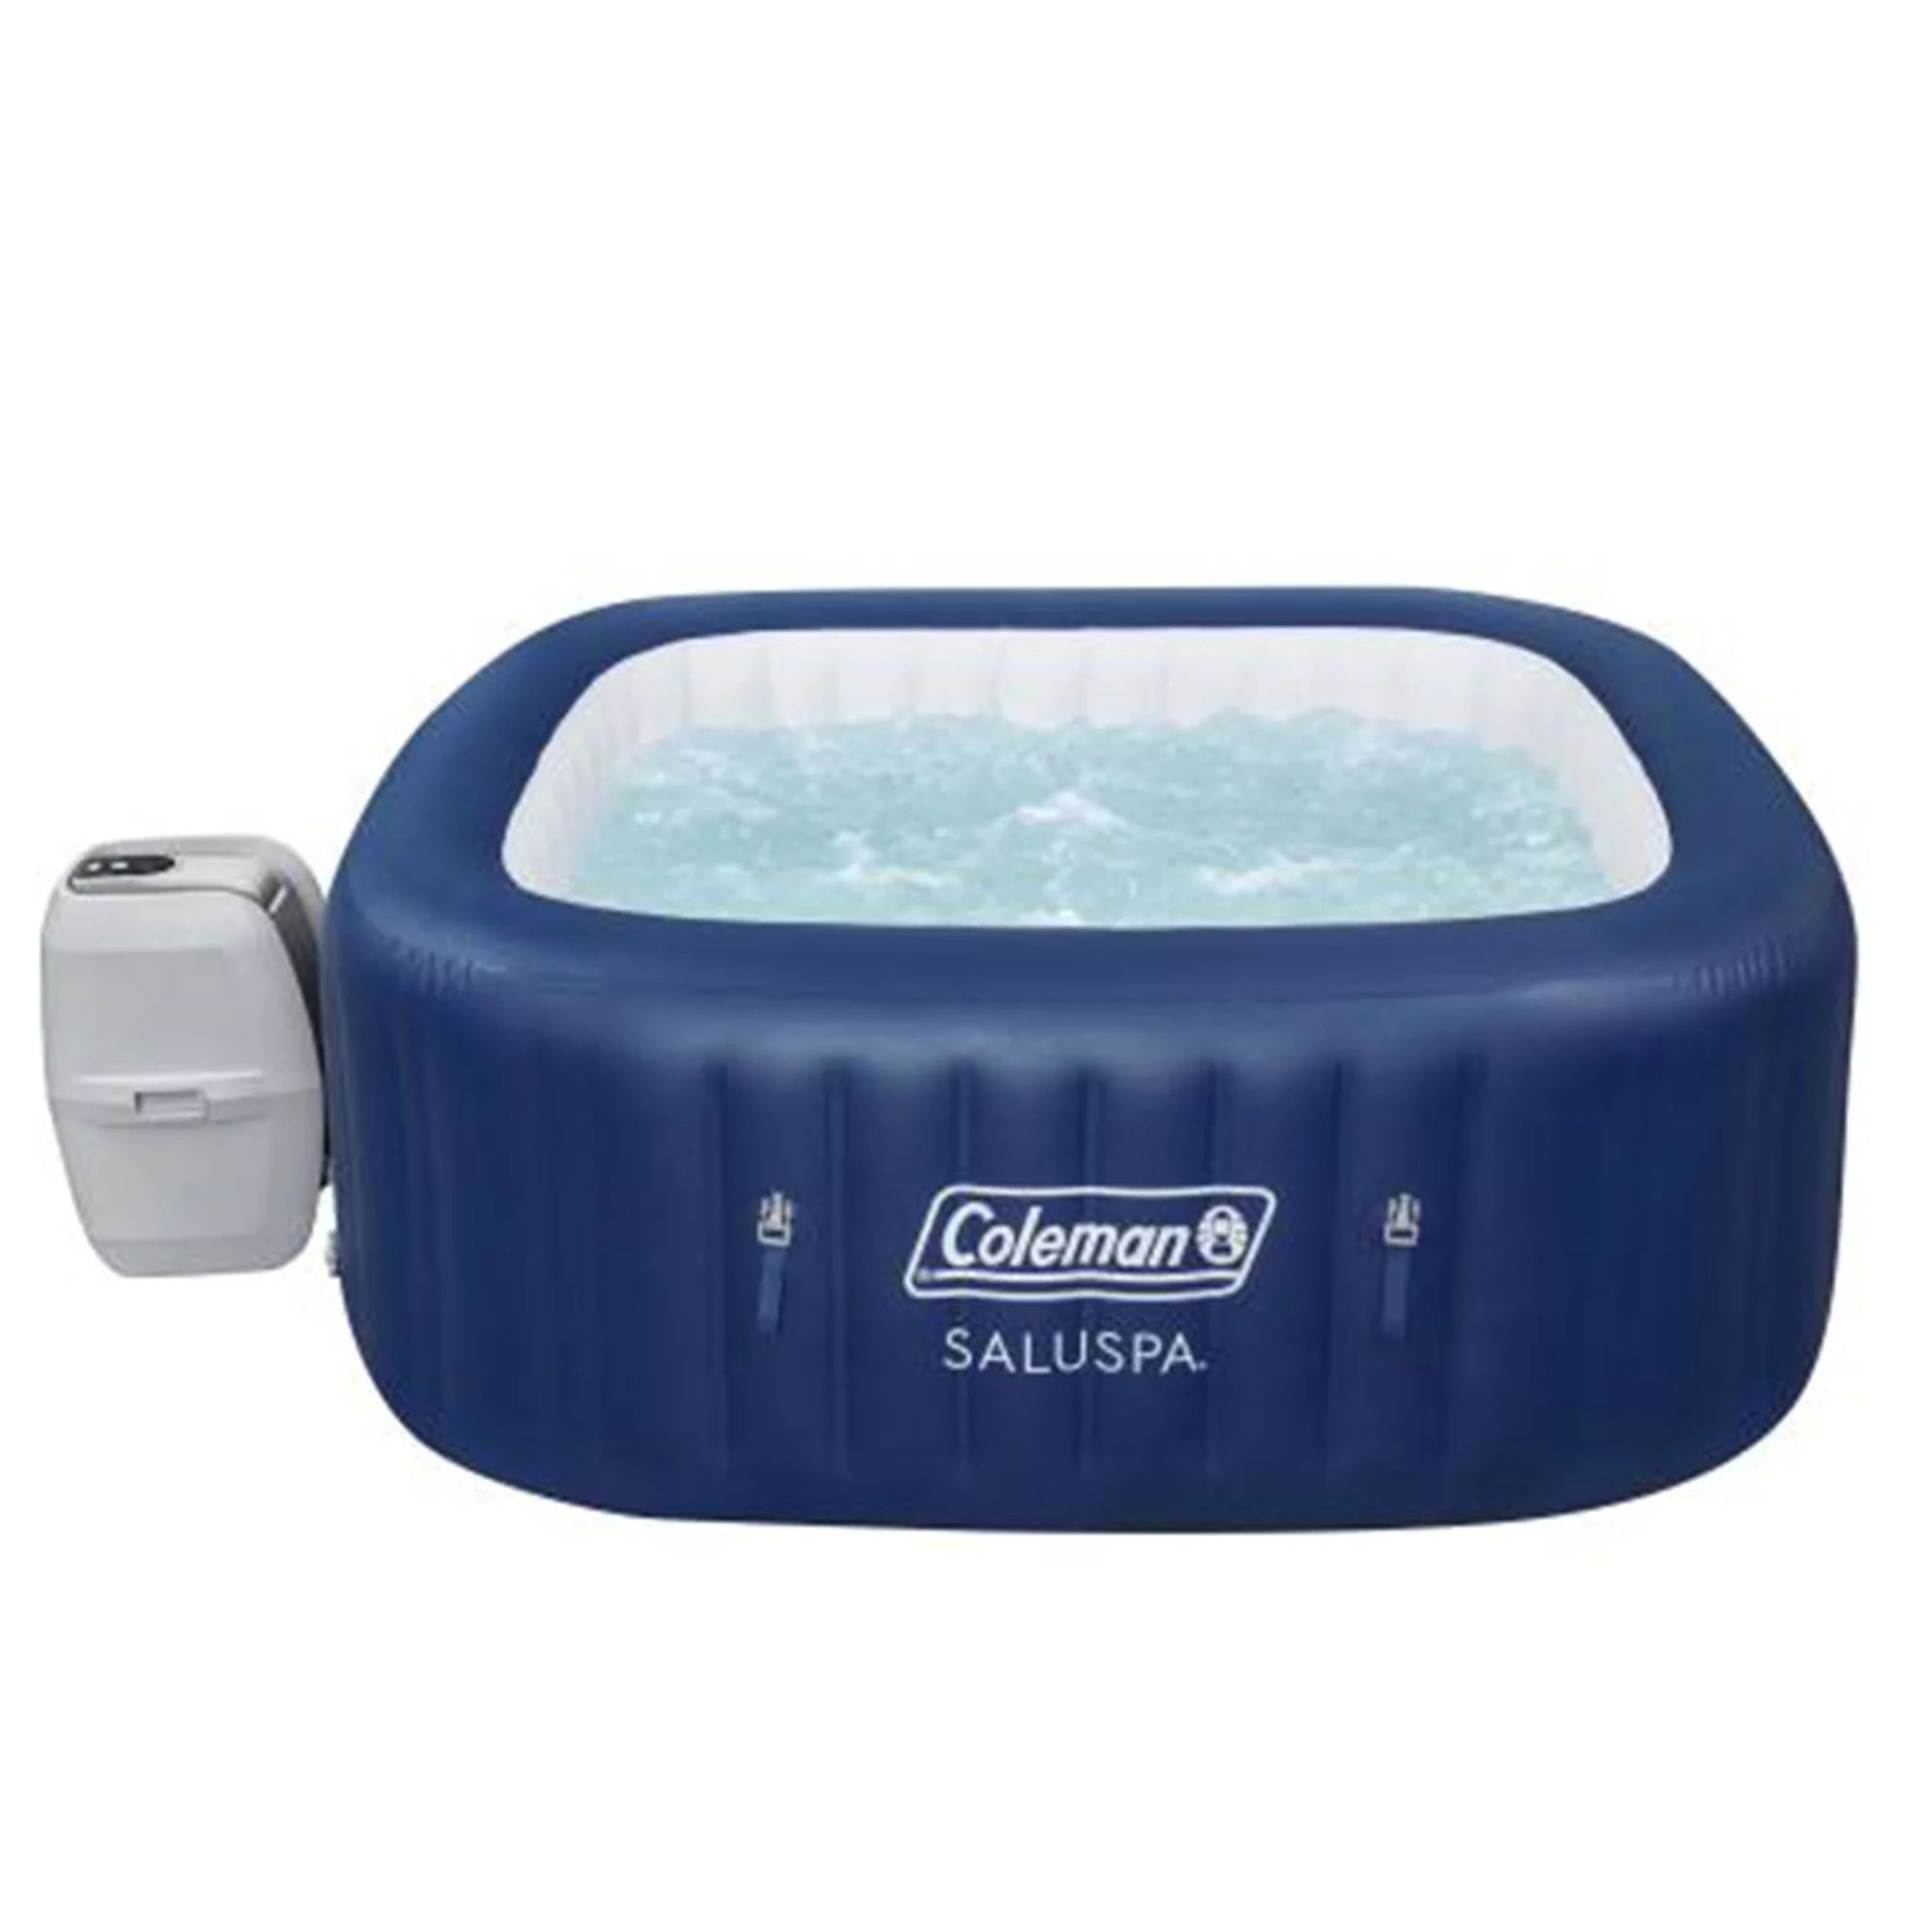 Coleman Atlantis SaluSpa 140 AirJet Square 4-6 Person Inflatable Hot Tub Spa with Cover, Blue | Walmart (US)